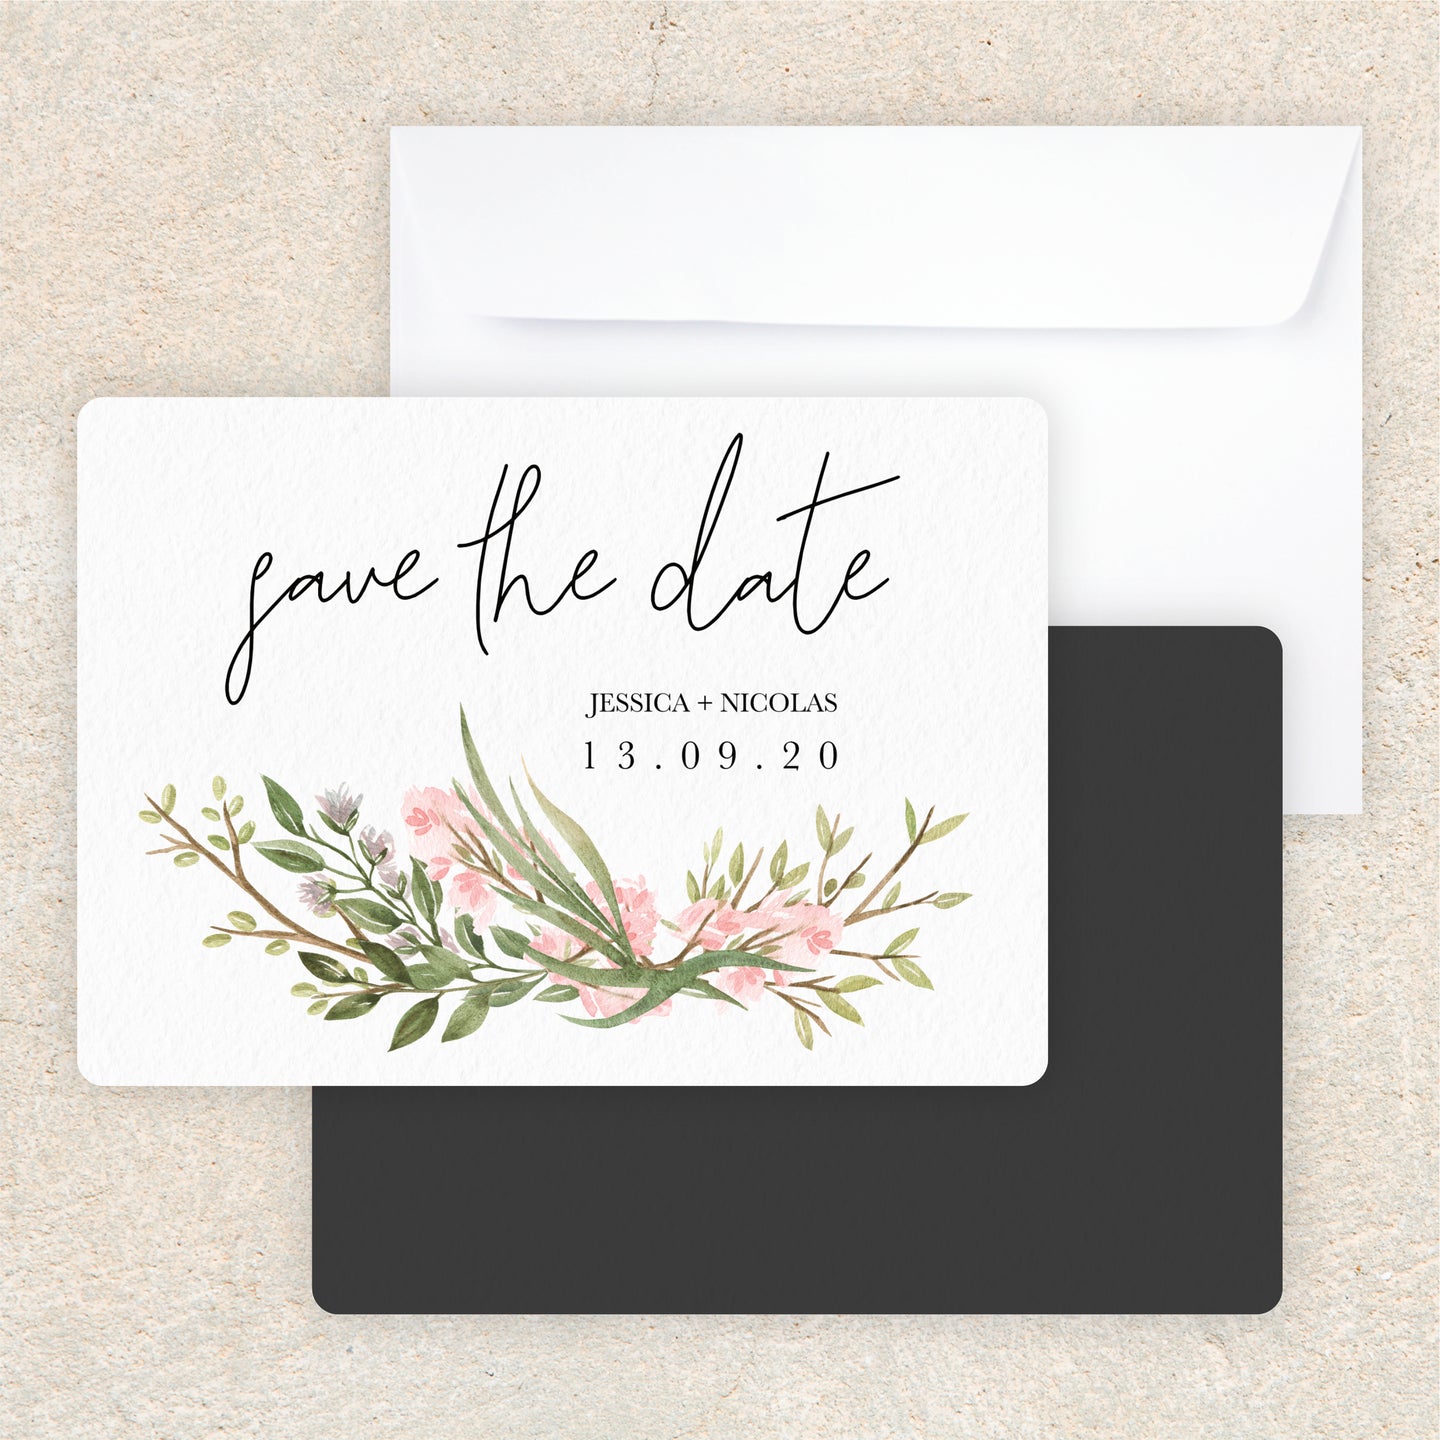 Jessica Save The Date Magnet